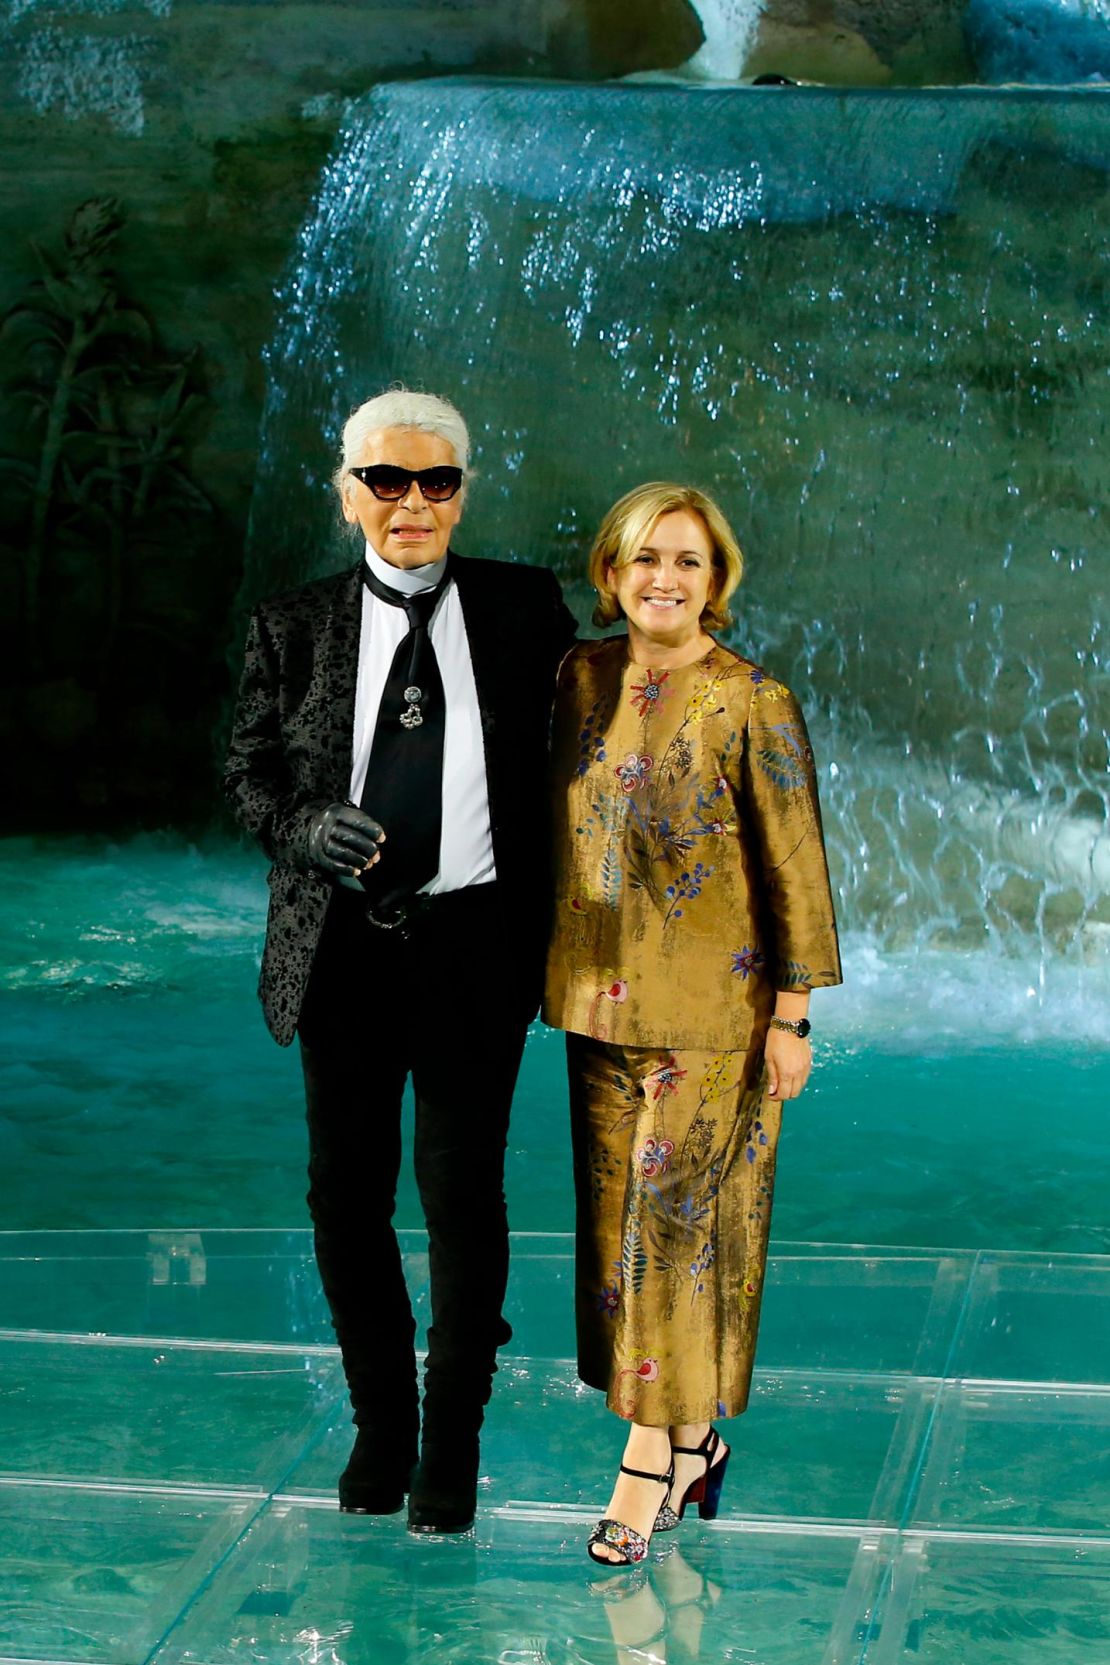 Karl Lagerfeld and Silvia Fendi walking after Fendi's Autumn-Winter 2017 haute couture show.